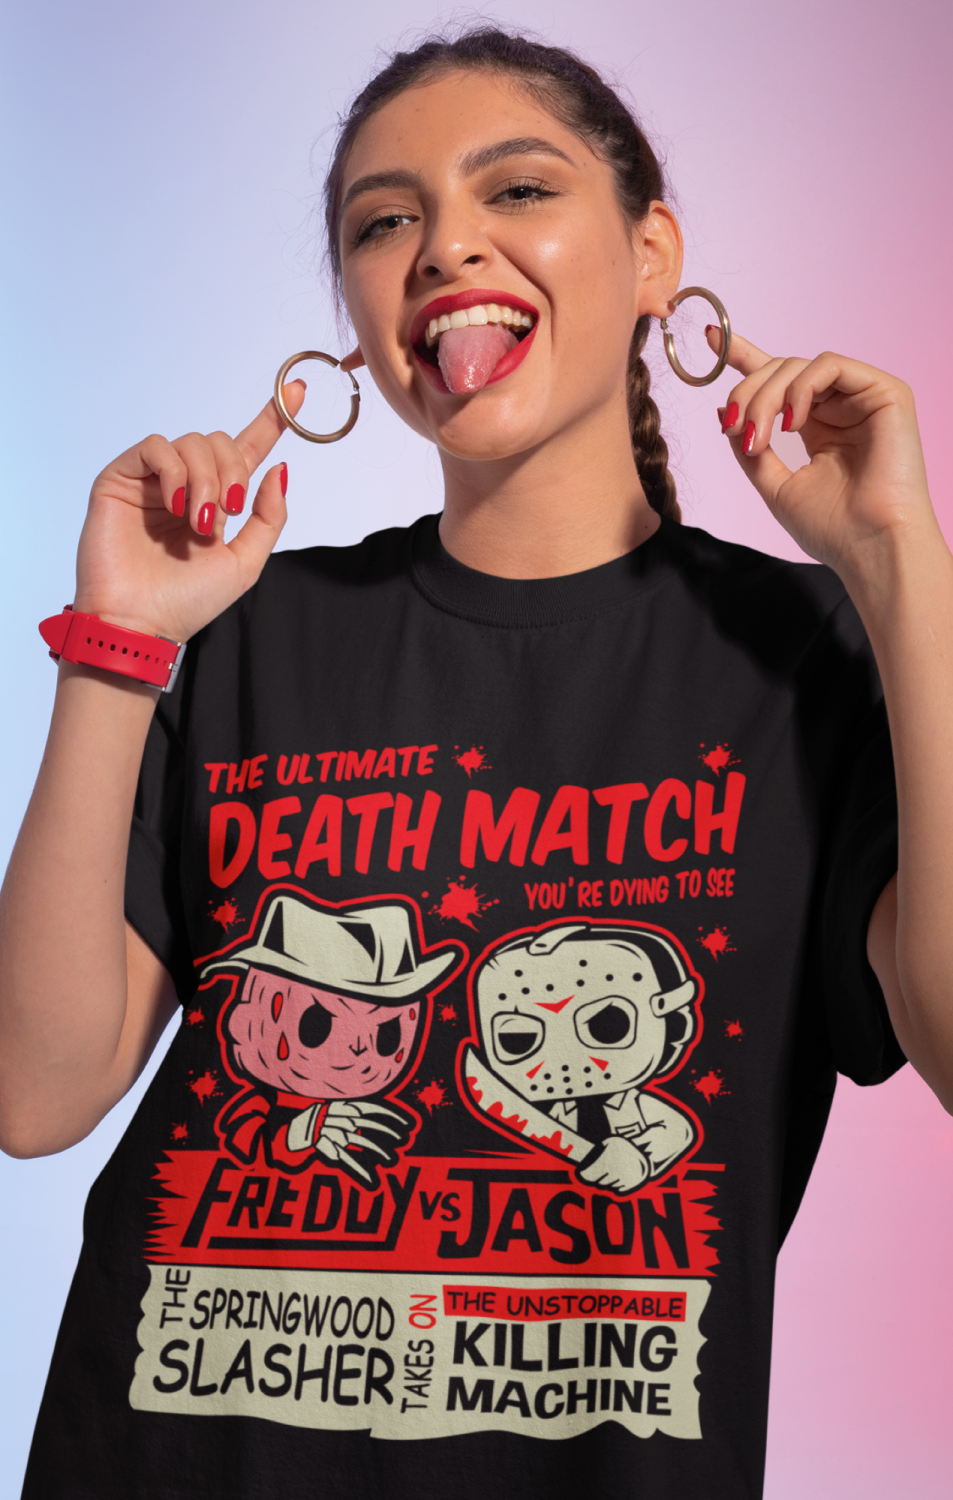 DEATH MATCH - CHOOSE THE STYLE